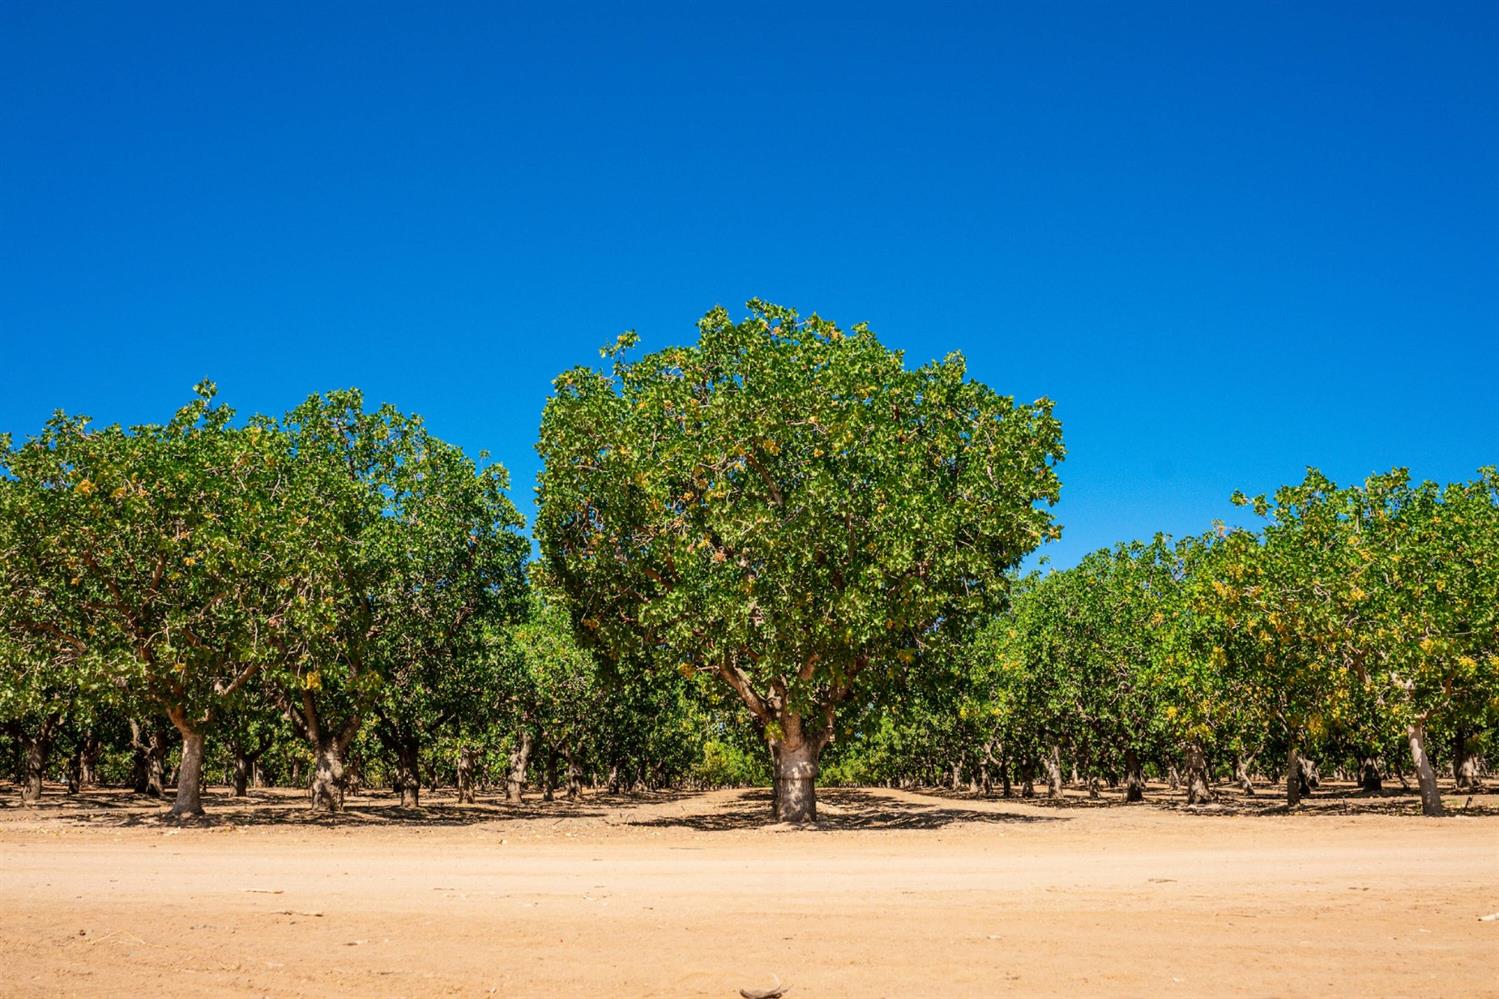 80.15 Acres of Pistachios. The best looking trees in the area.Producing orchard of Kerman variety pistachios with Peter pollinizers planted to Atlanticrootstock. Planted in the 1970s. Approximate spacing is 13' by 25'.Production Records available on request.Madera Water District. The ranch is also annexed into Madera Irrigation District asSubordinate Class 3, which may purchase water from Madera Irrigation District whenavailable. Single line drip with micro-sprinklers.Madera County APN 031-102-008 40.07 Acres.Madera County APN 031-111-016 40.08 Acres.Property is located south of Avenue 21 and east of Road 28 1/2 in Madera County, CA.Approximately 5mi. northeast of Madera, CA.